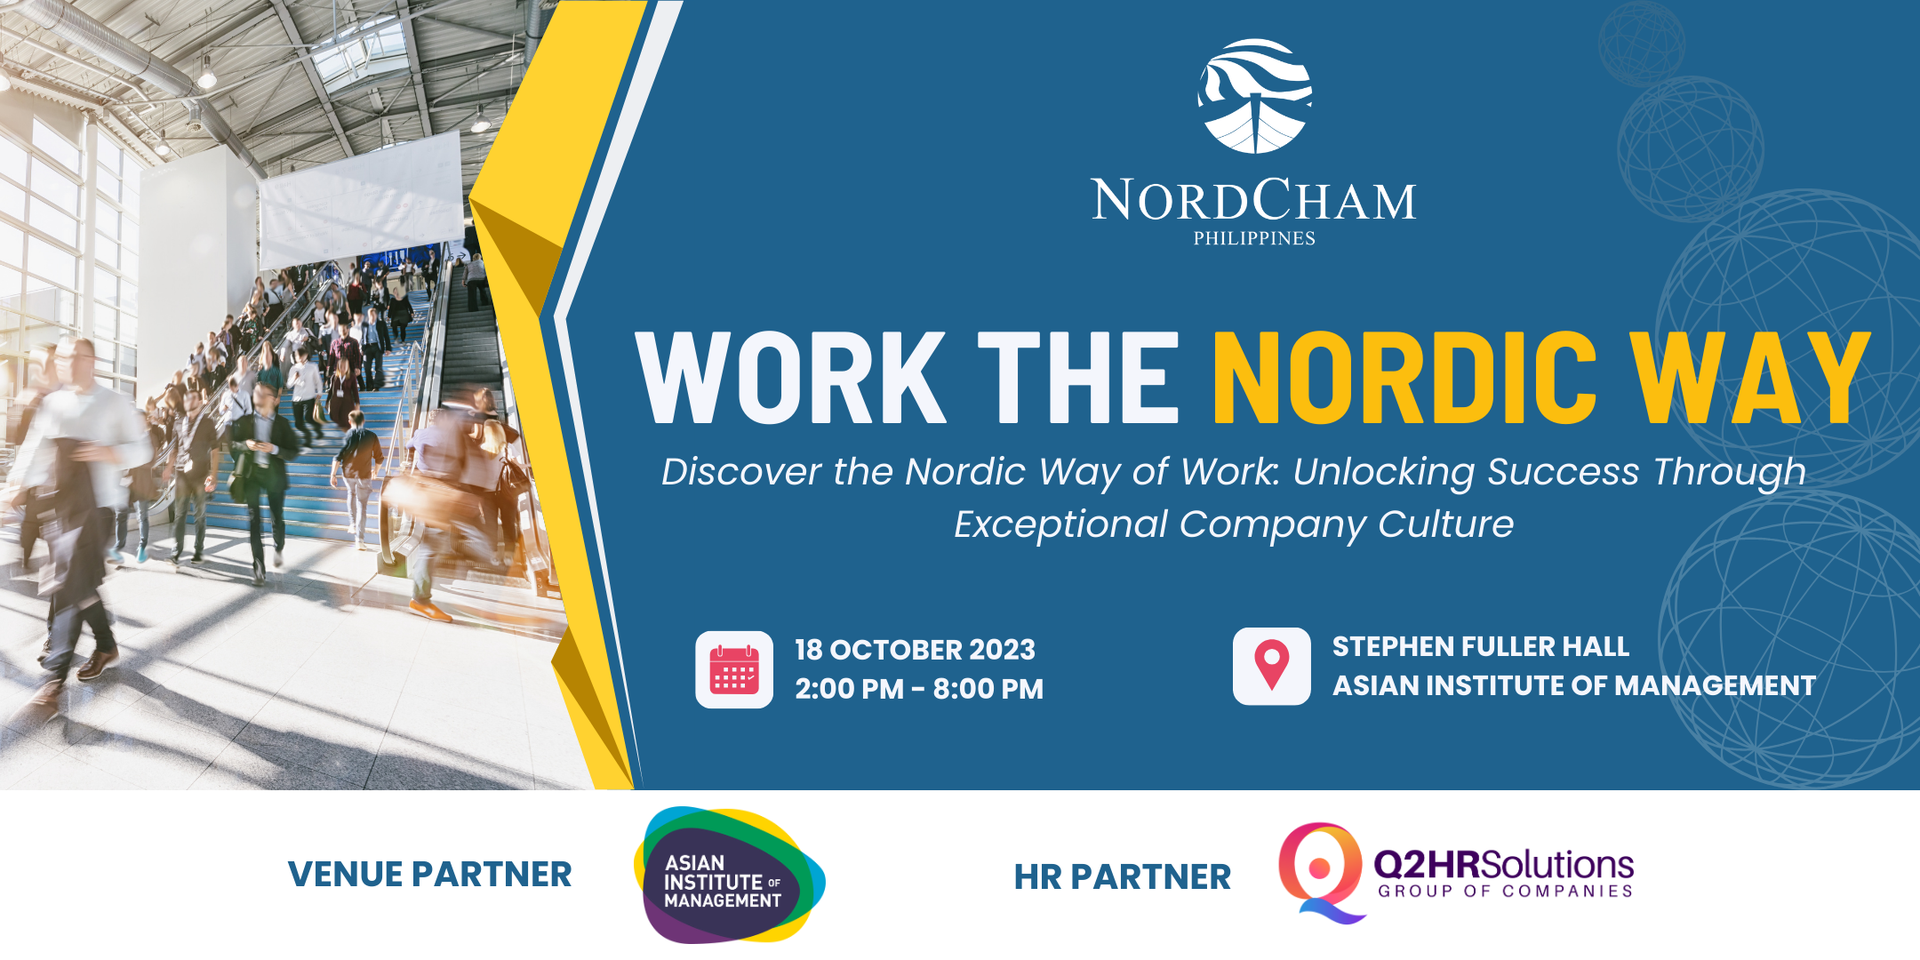 thumbnails WORK THE NORDIC WAY | 18 OCTOBER 2023 | ASIAN INSTITUTE OF MANAGEMENT